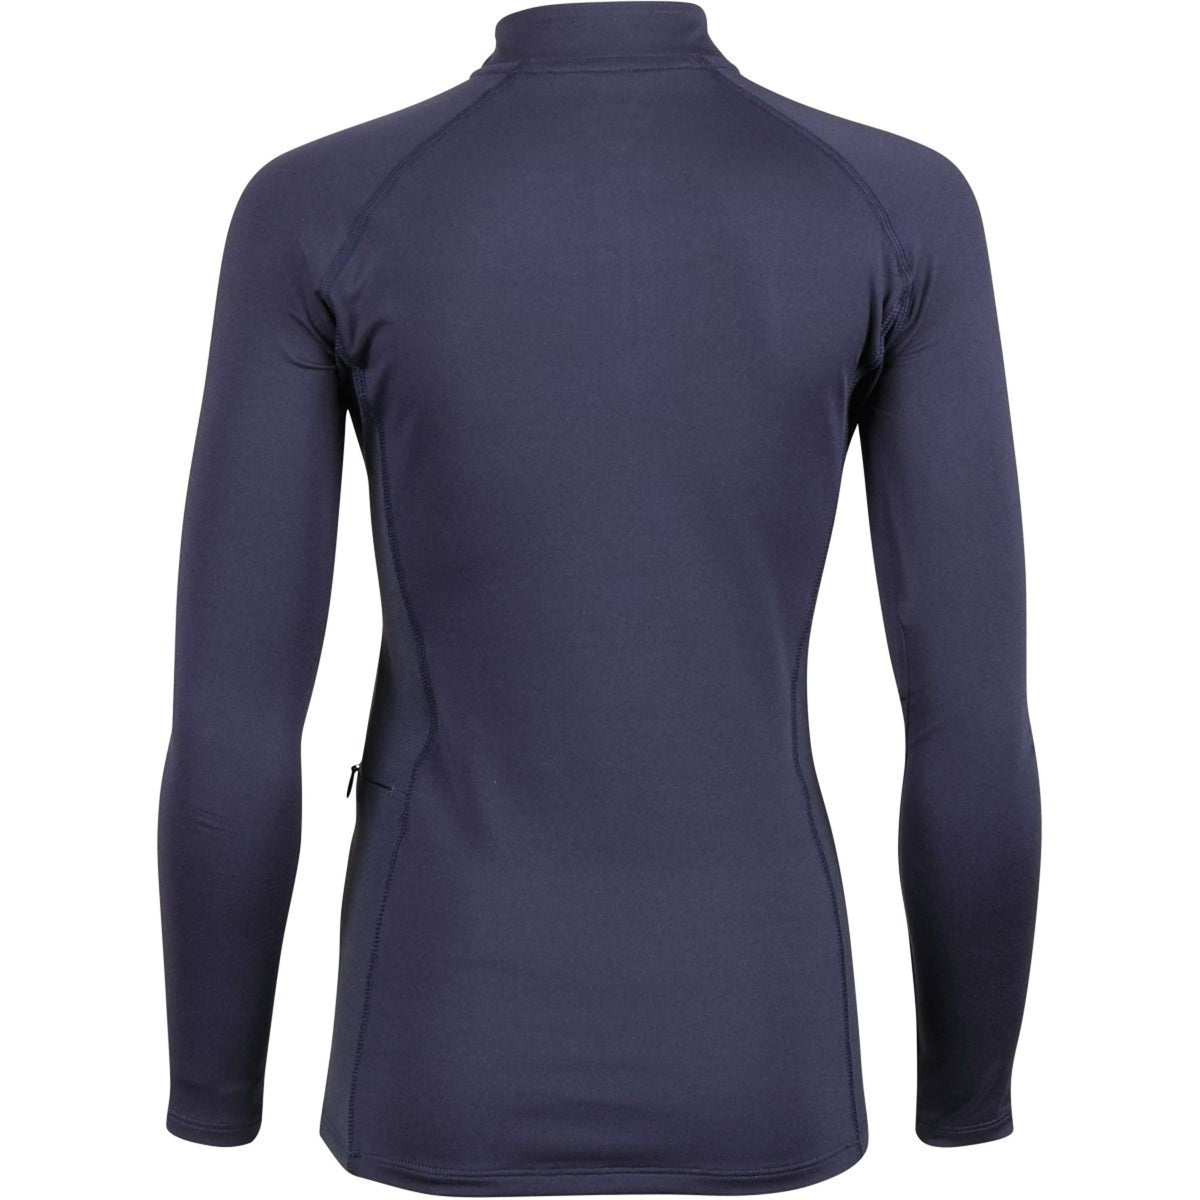 Aubrion by Shires Base Layer Revive Young Rider Navy